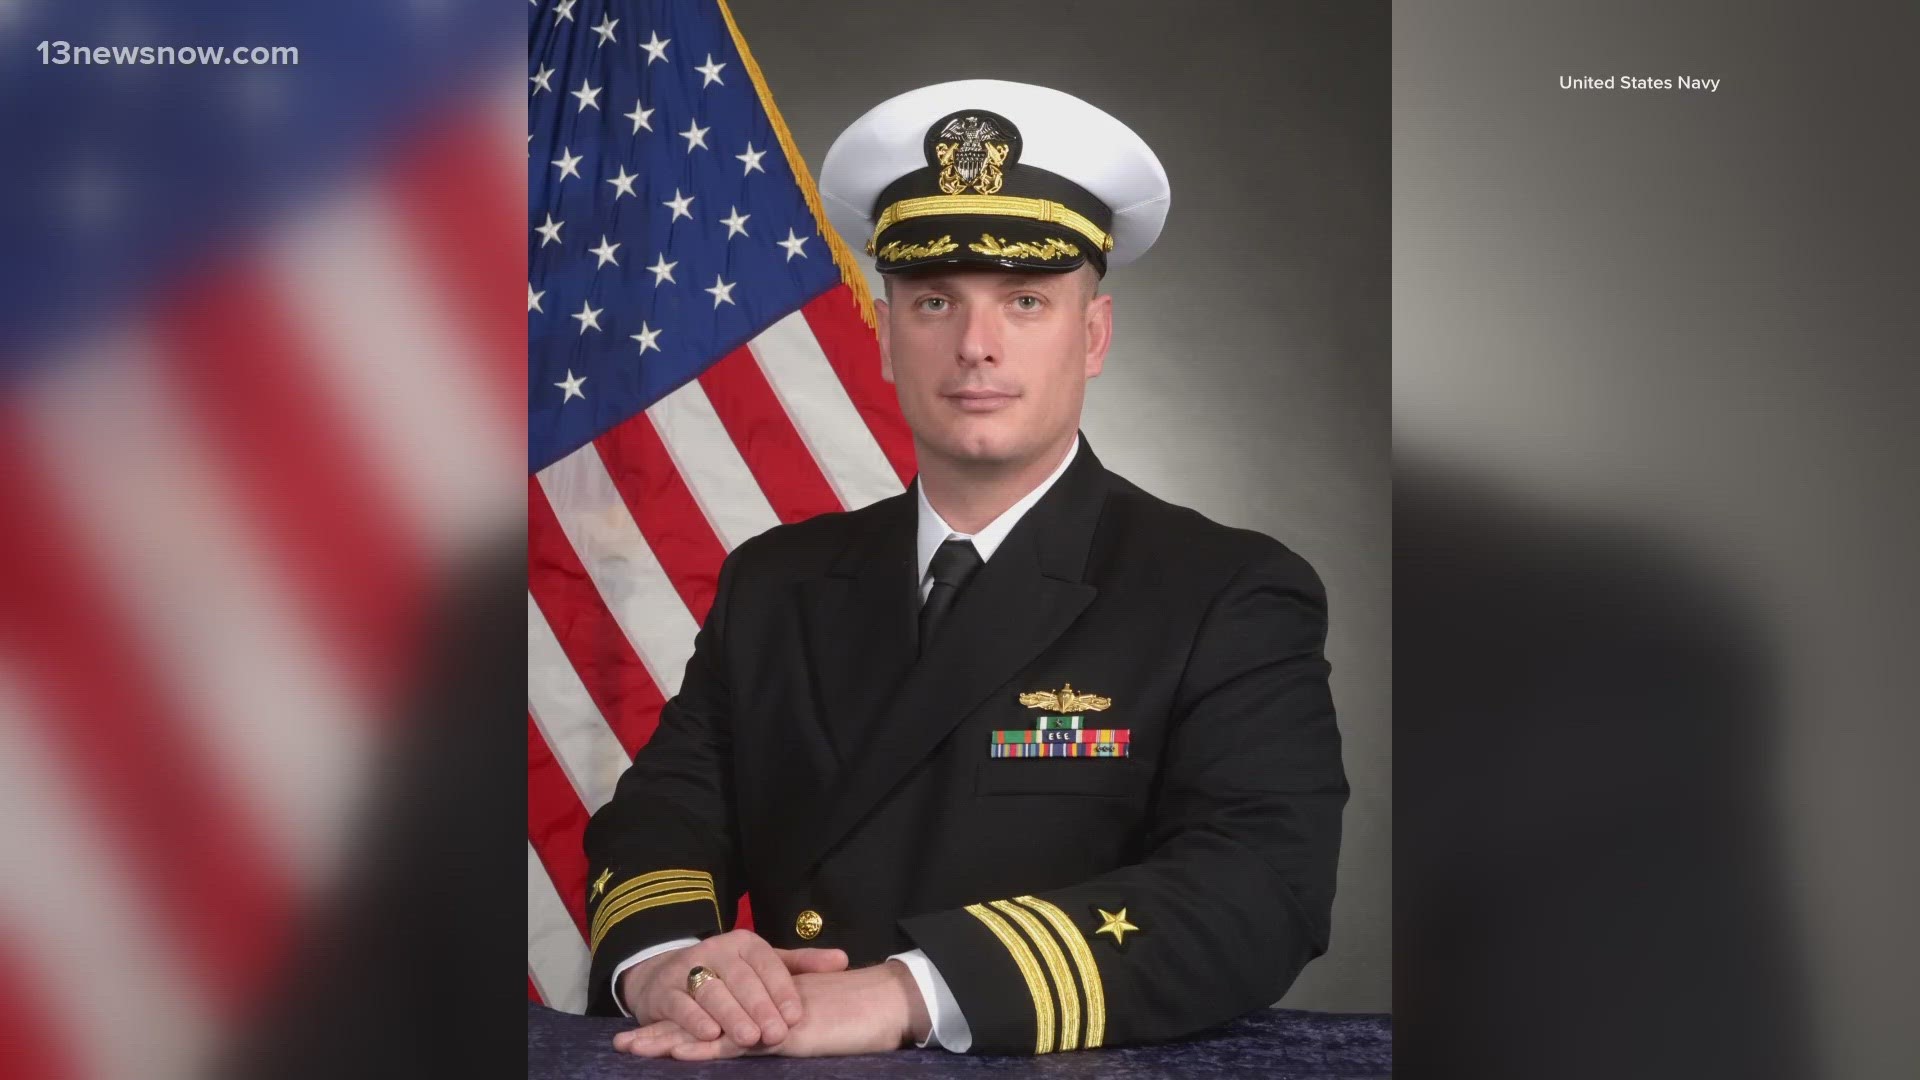 According to a news release posted on the Navy's website, Commander Jeffrey Applebaugh was relieved due to a "loss of confidence in his ability to command."